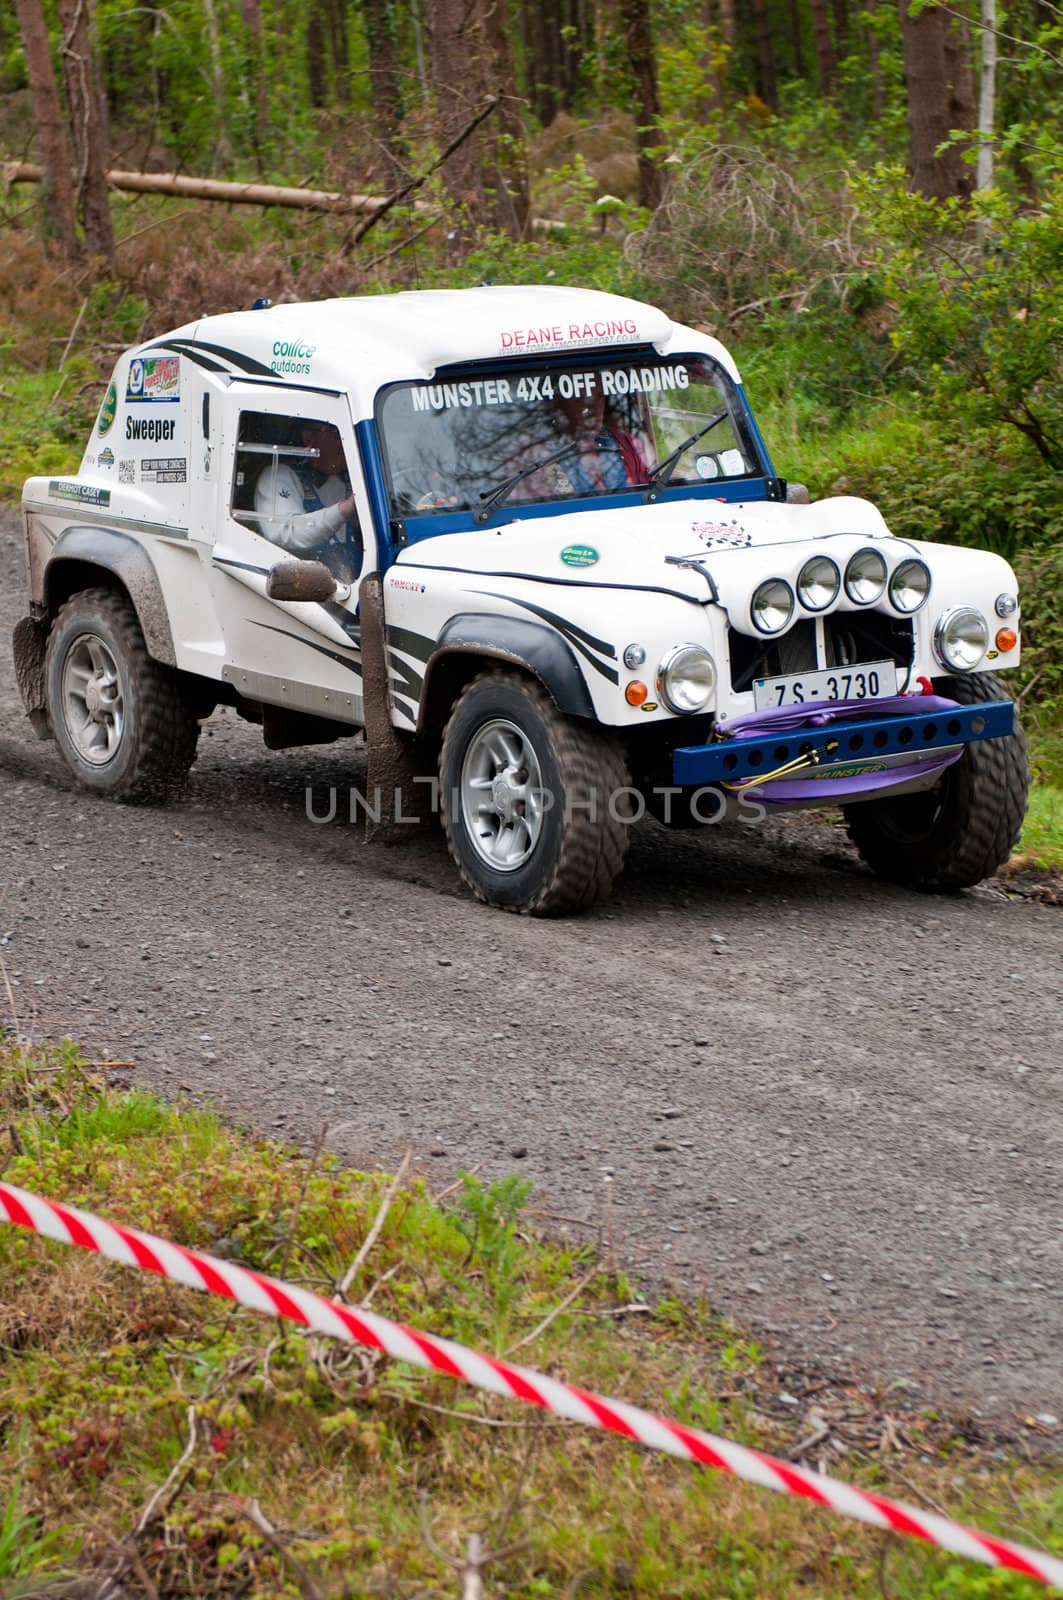 Land Rover Tomcat rally by luissantos84